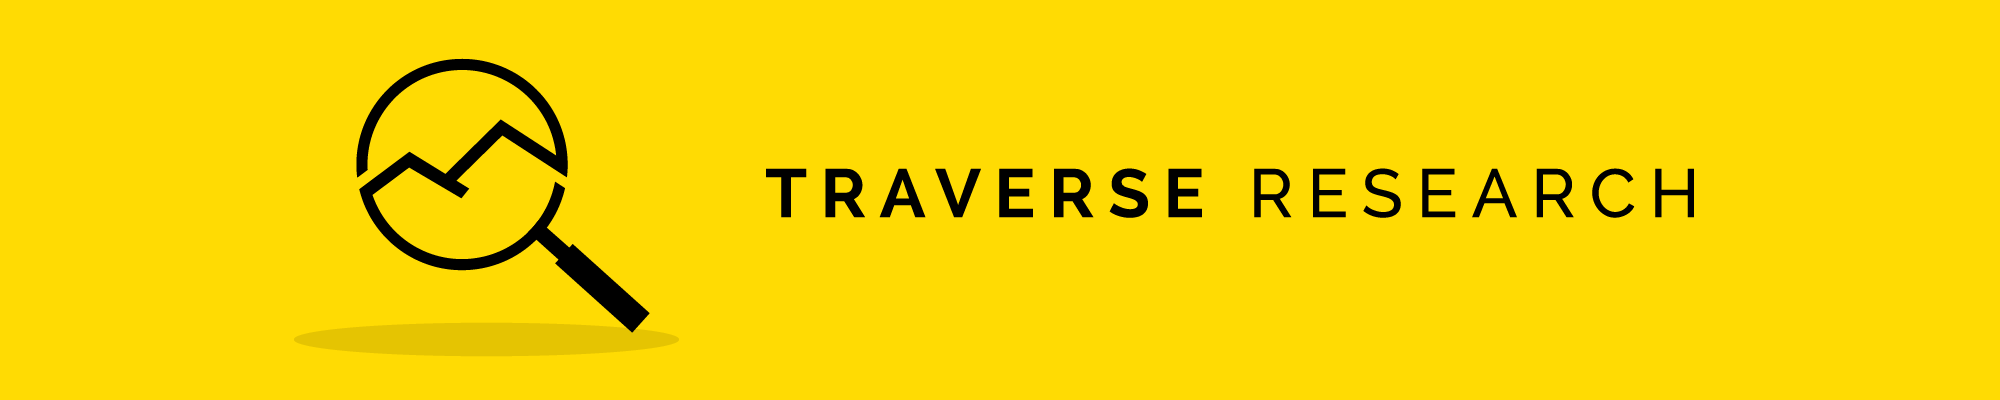 Traverse Research banner